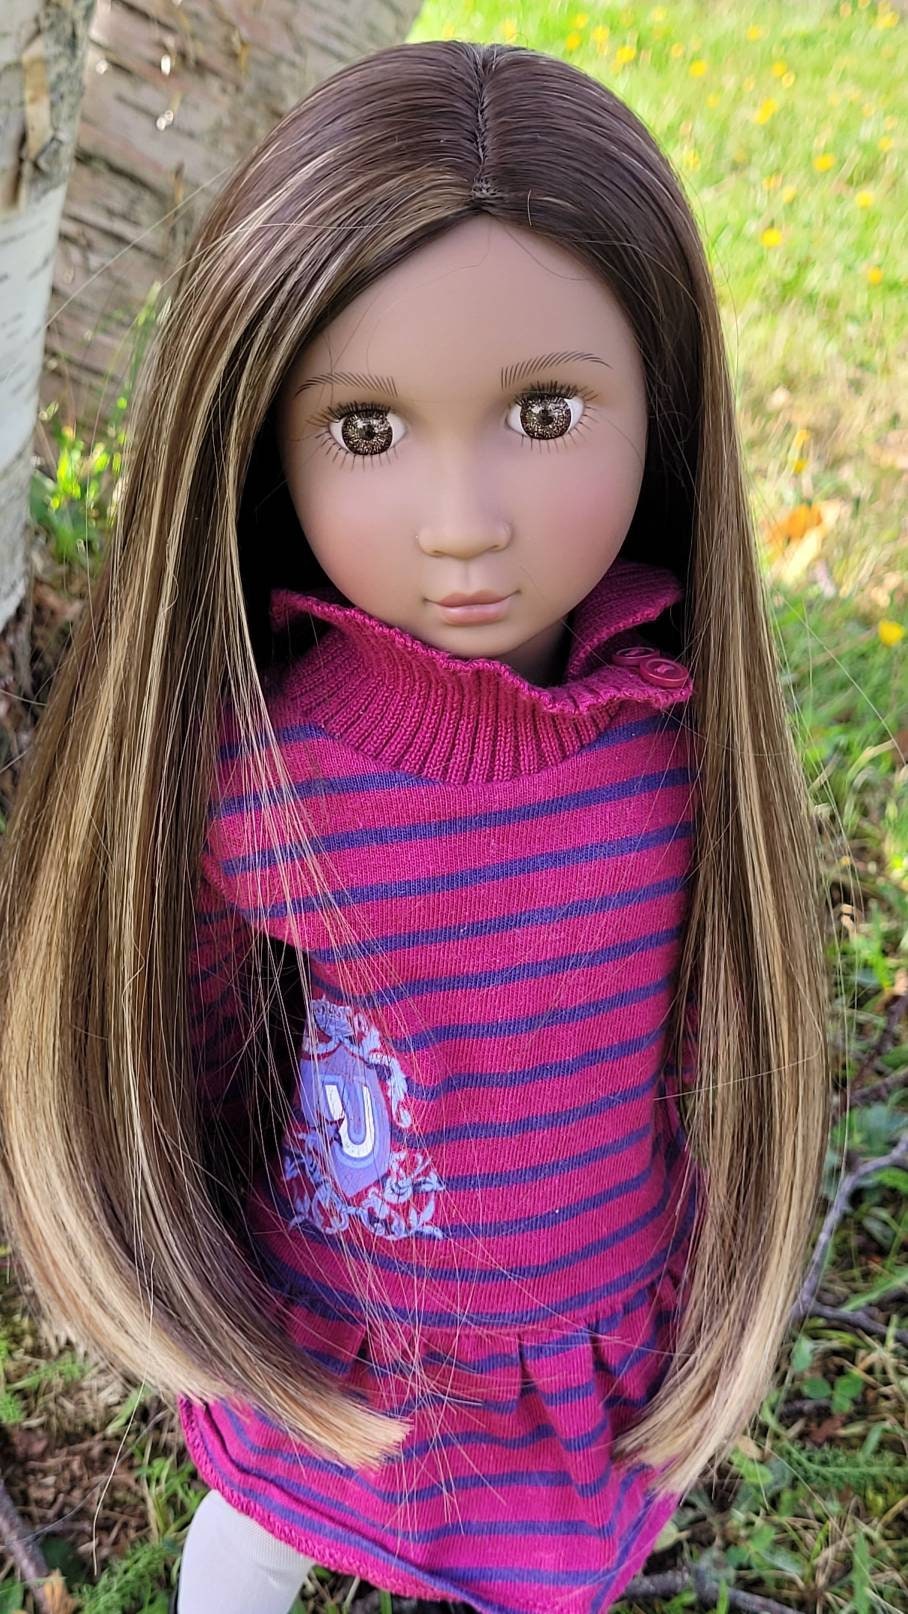 Custom doll WIG for 16"  AGAT Dolls - Heat Safe-Tangle Resistant- fits 9" head size Kaye Wiggs Ruby Red Fashion Friends A girl for all time